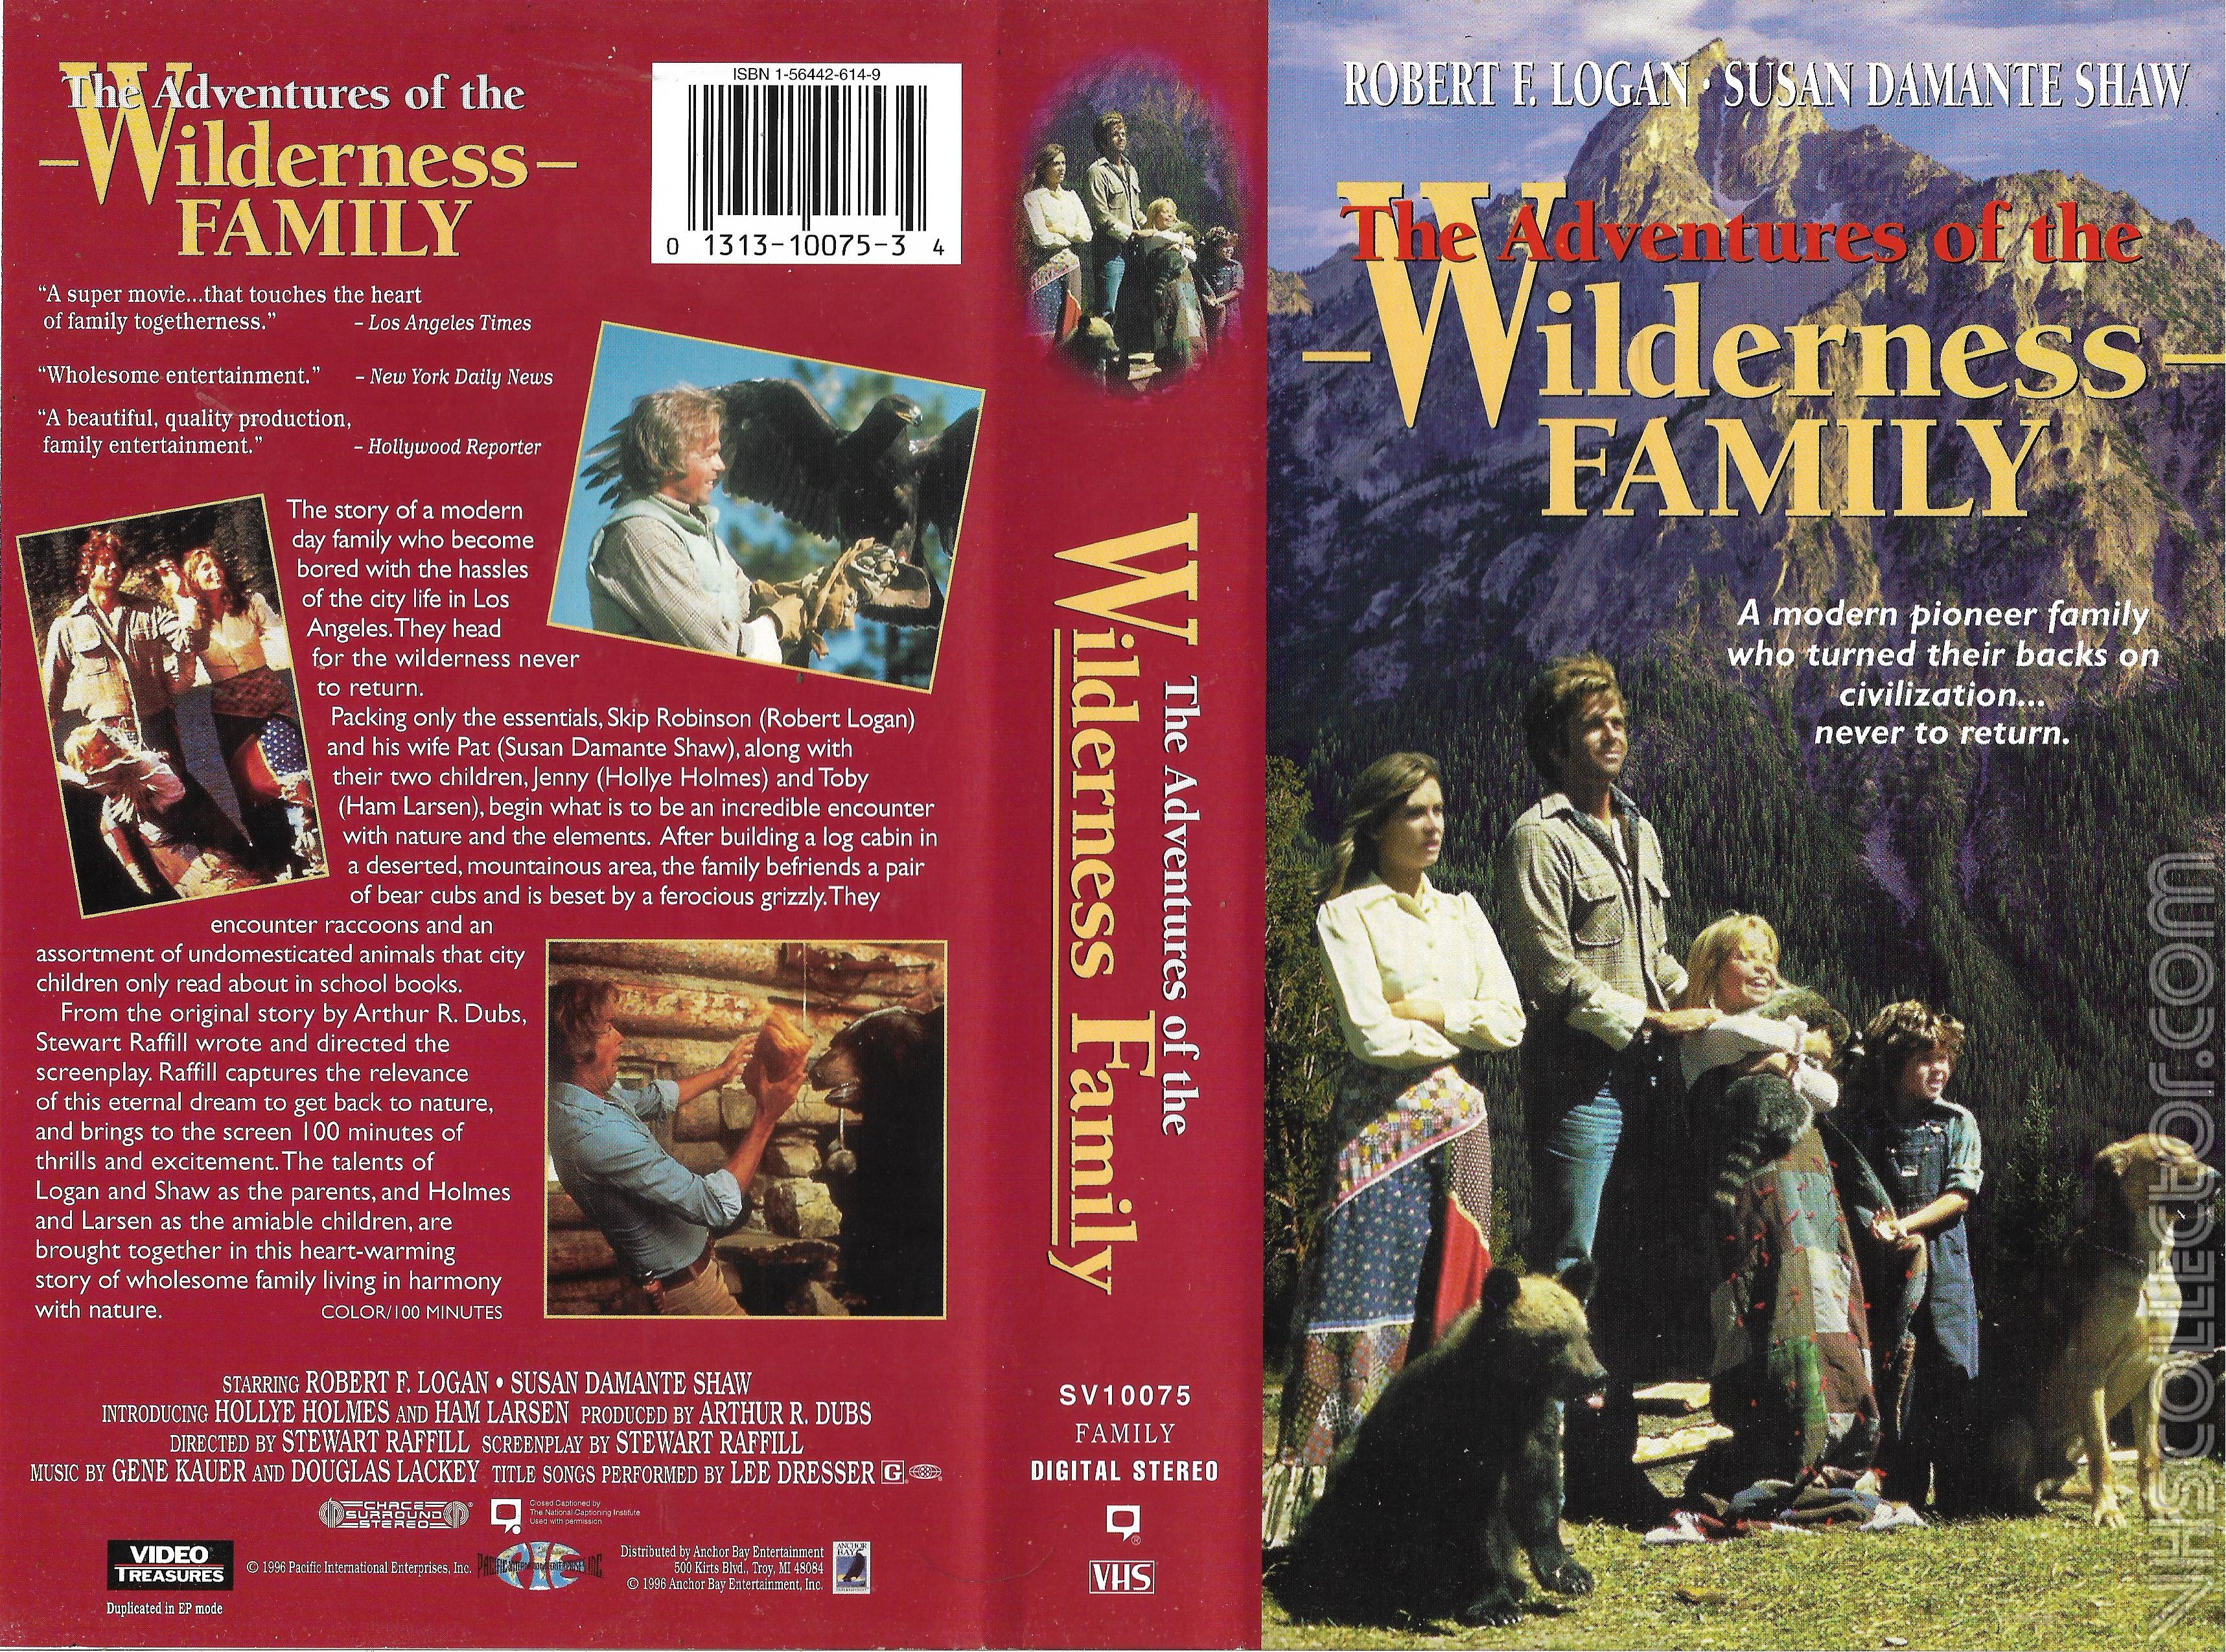 The Adventures of the Wilderness Family | VHSCollector.com